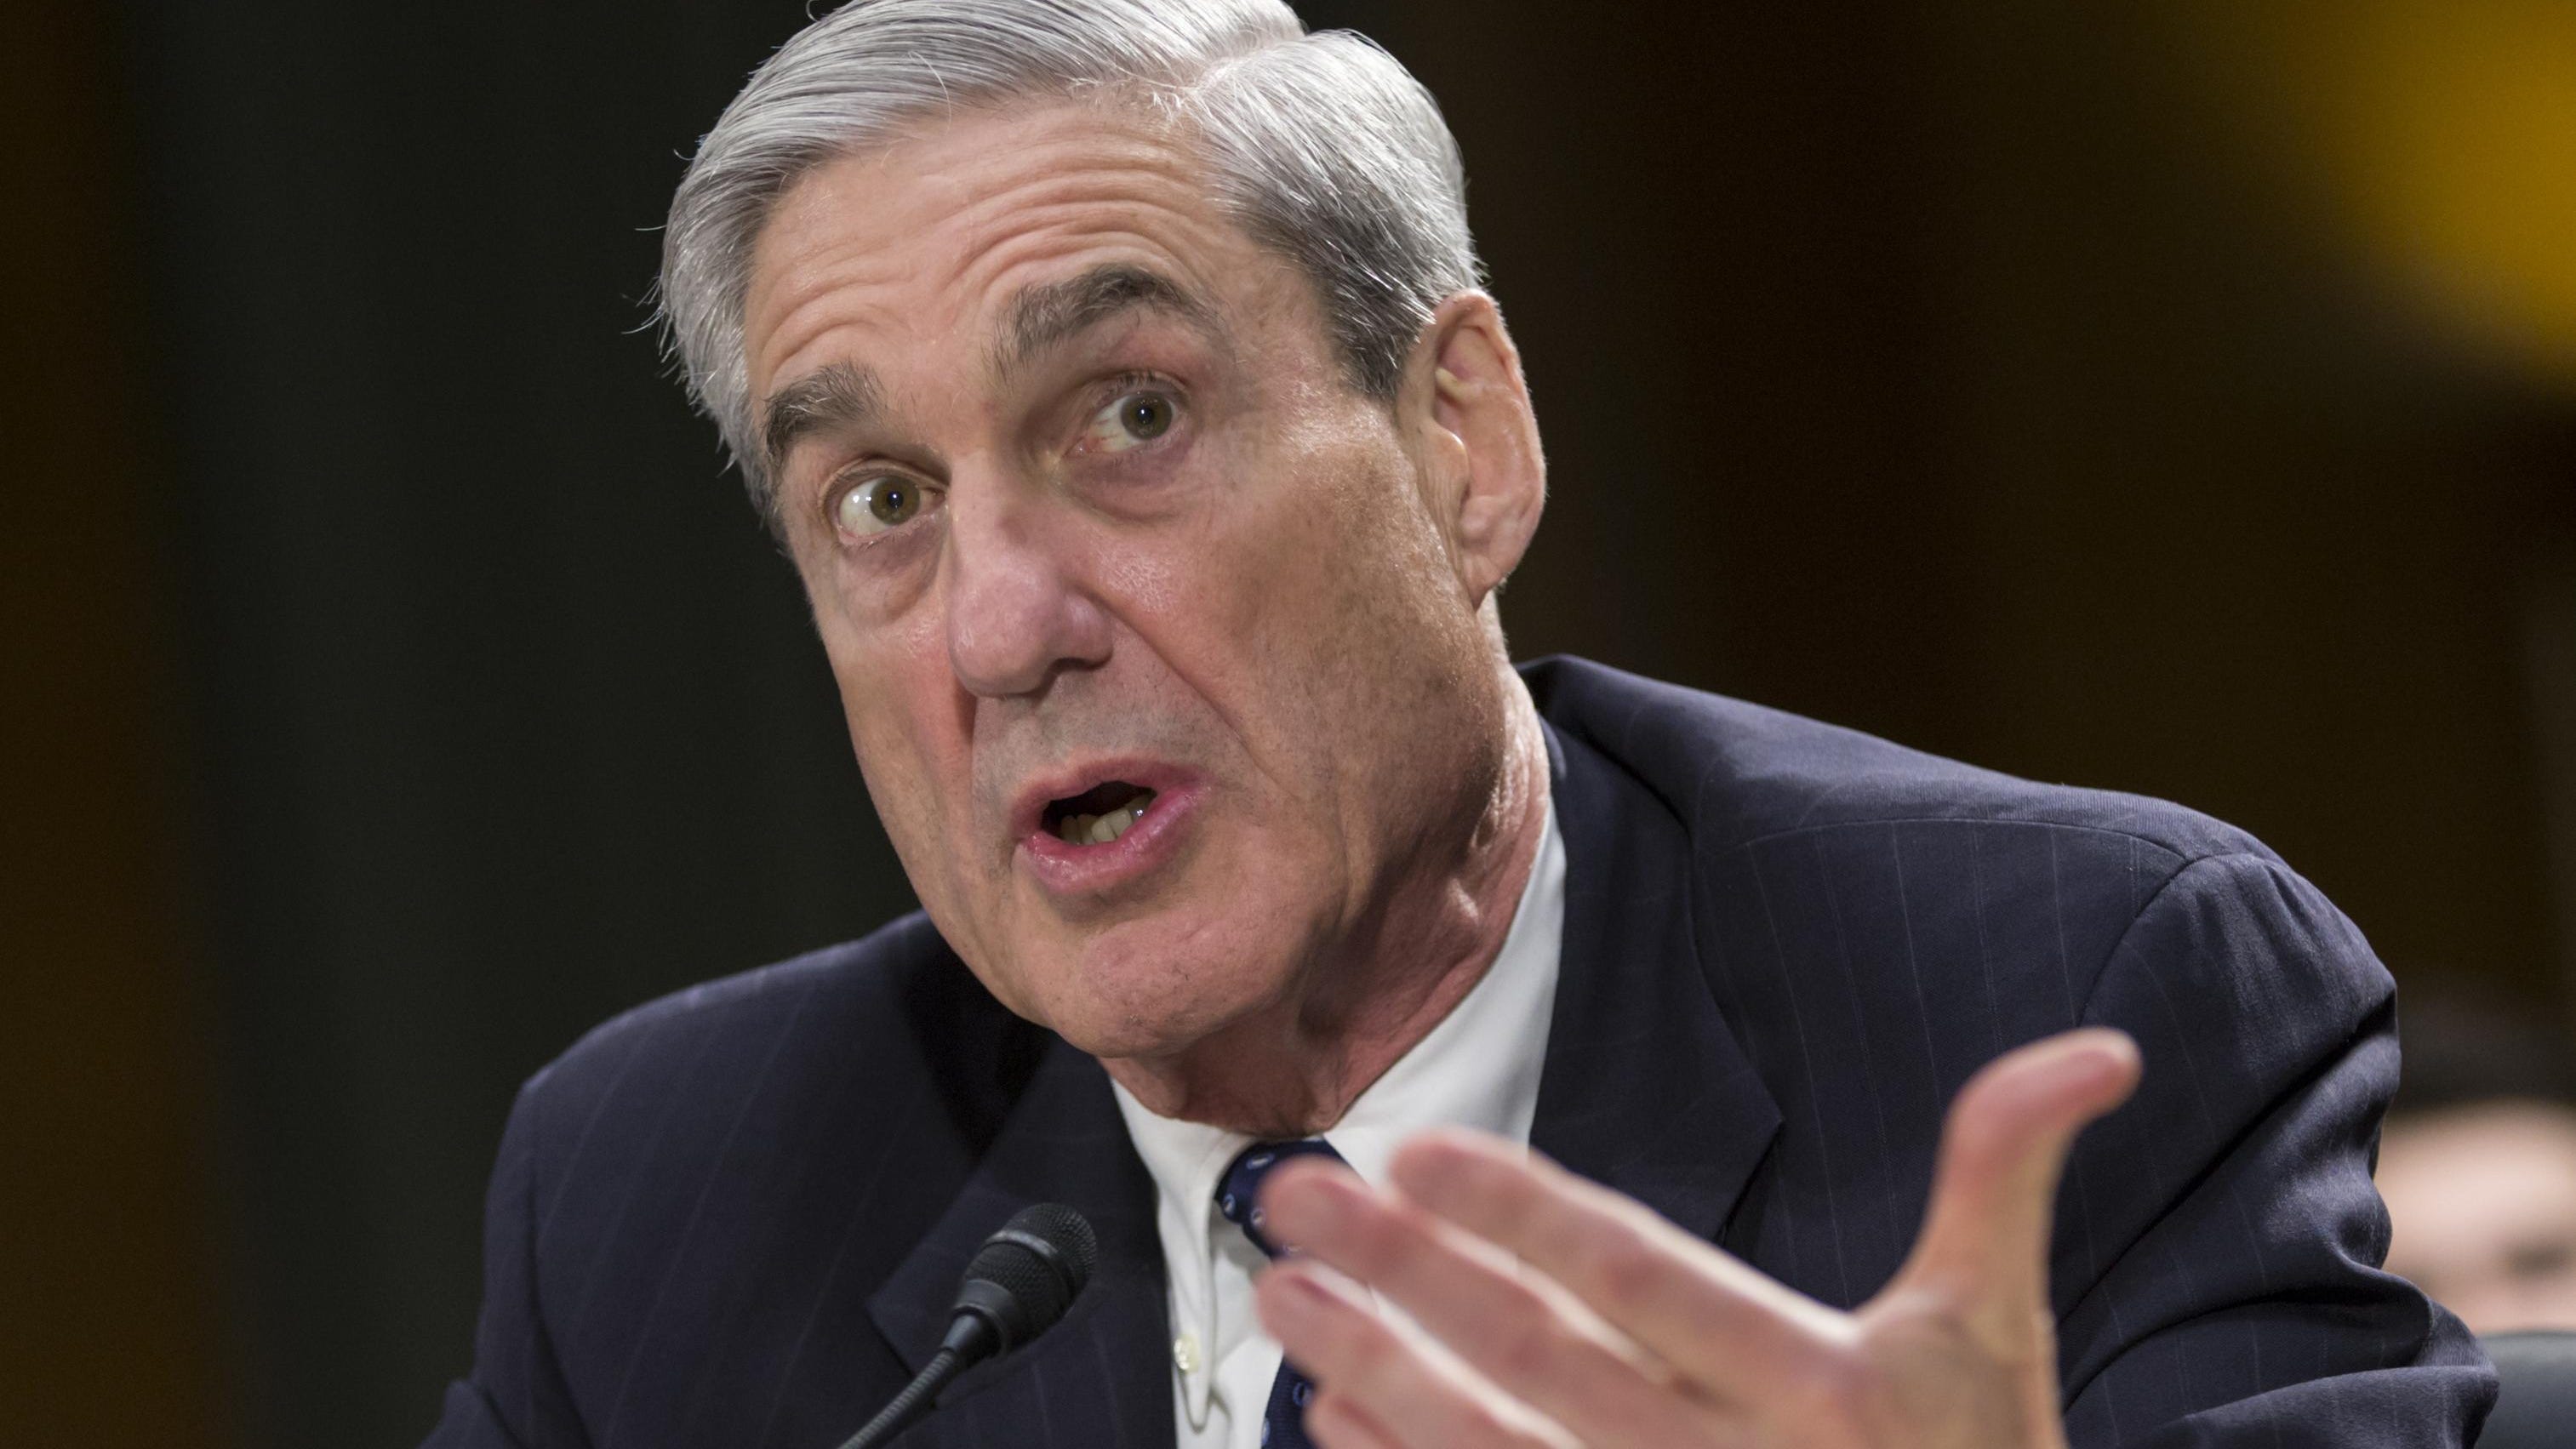 For all the expected splash of Robert Mueller’s report, it arrived with more of a thud, thanks to the secrecy surrounding it. And few saw any reason to think it would sway many opinions in a divided republic.